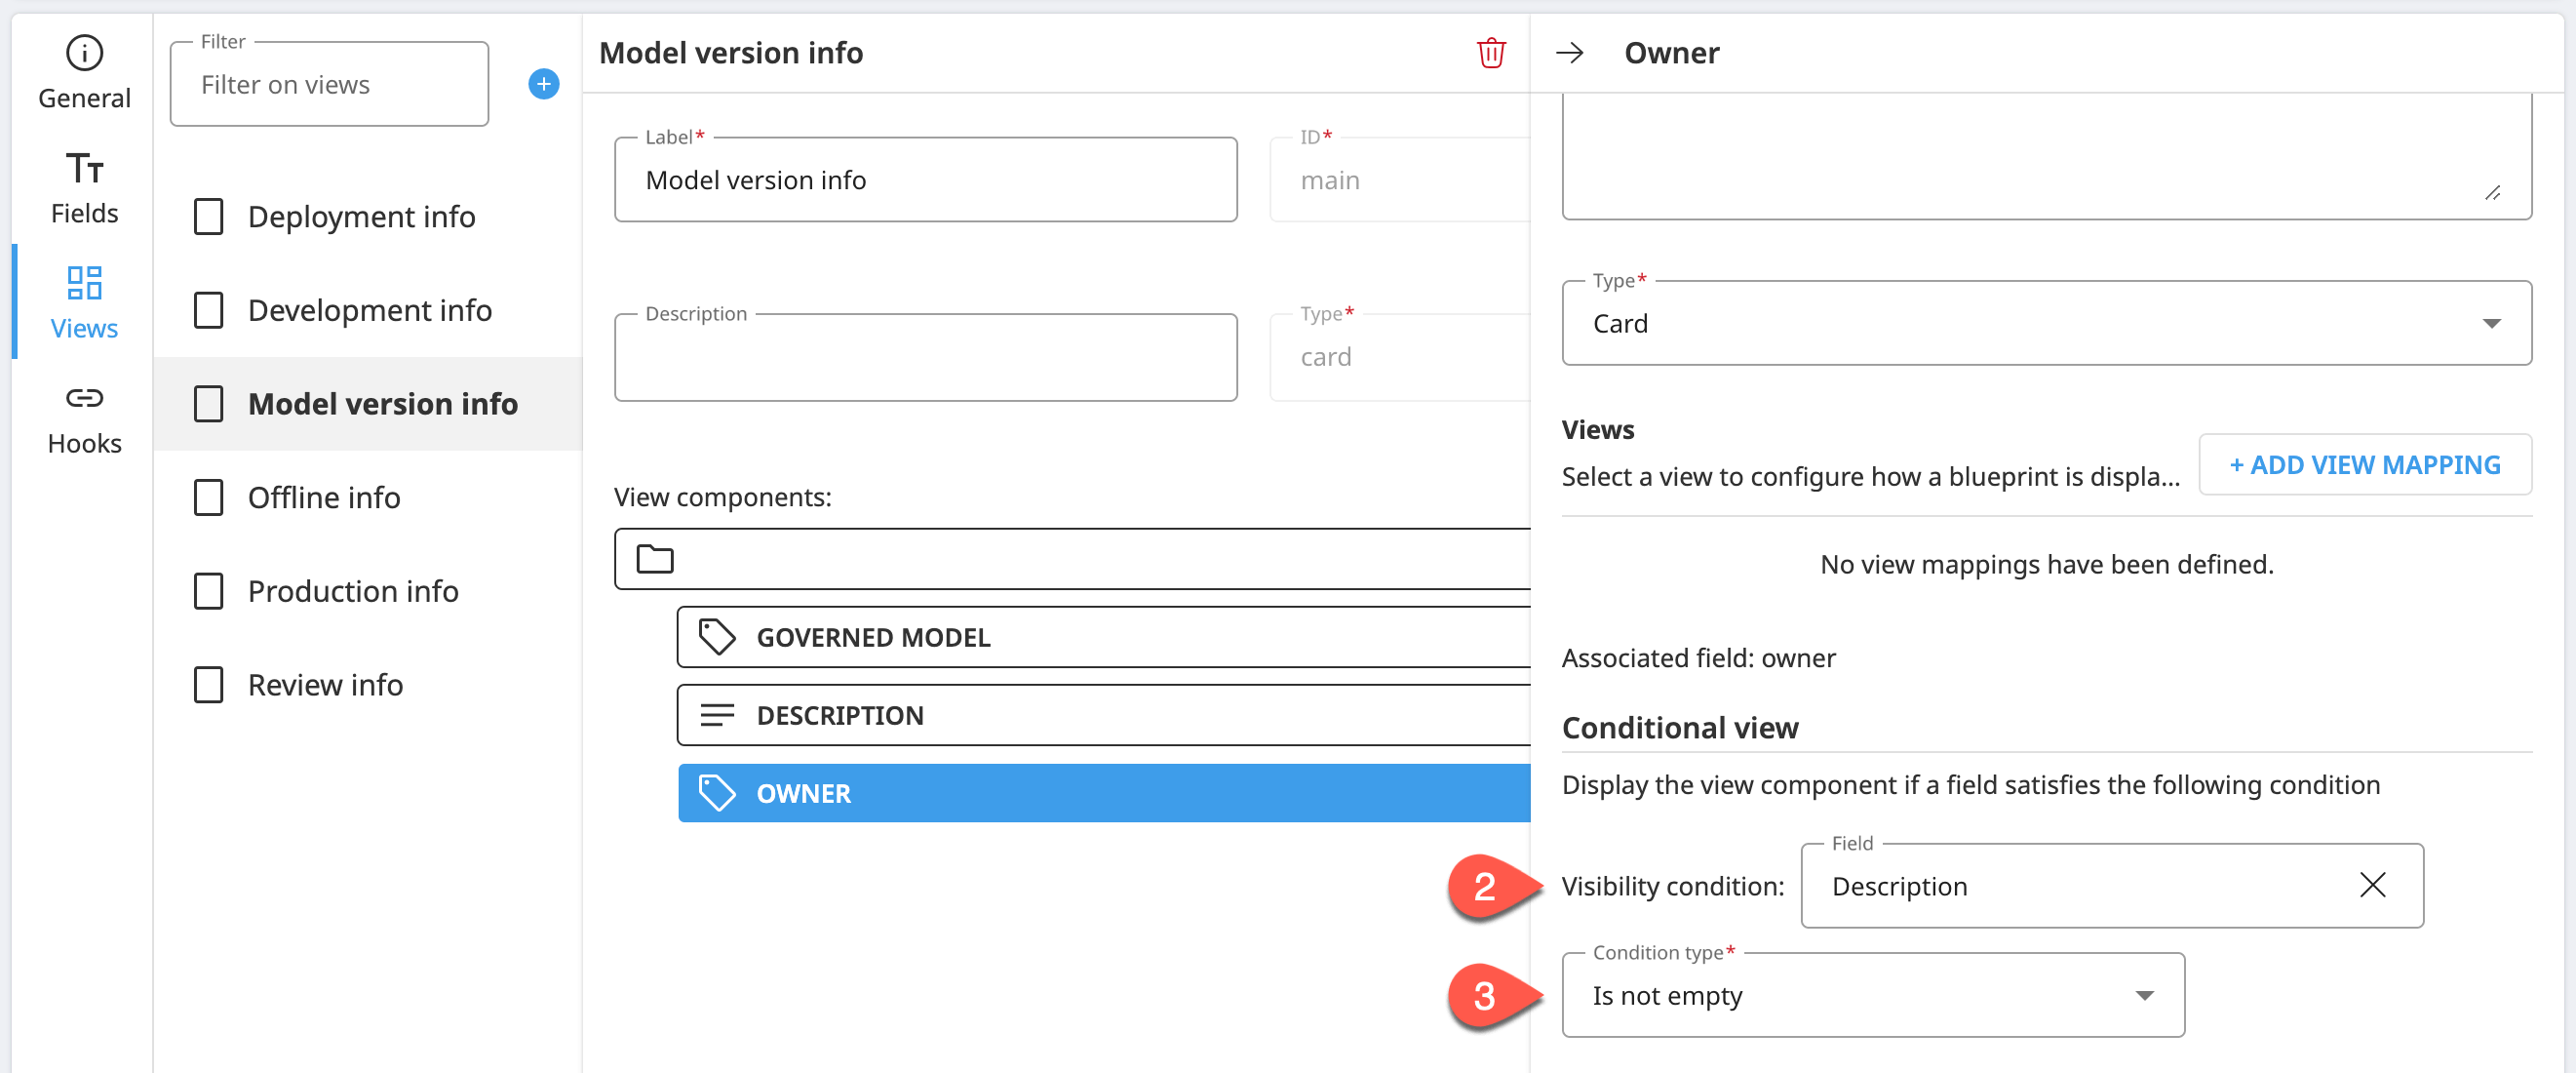 Dataiku screenshot highlighting the steps to add a conditional view to the Owner field.